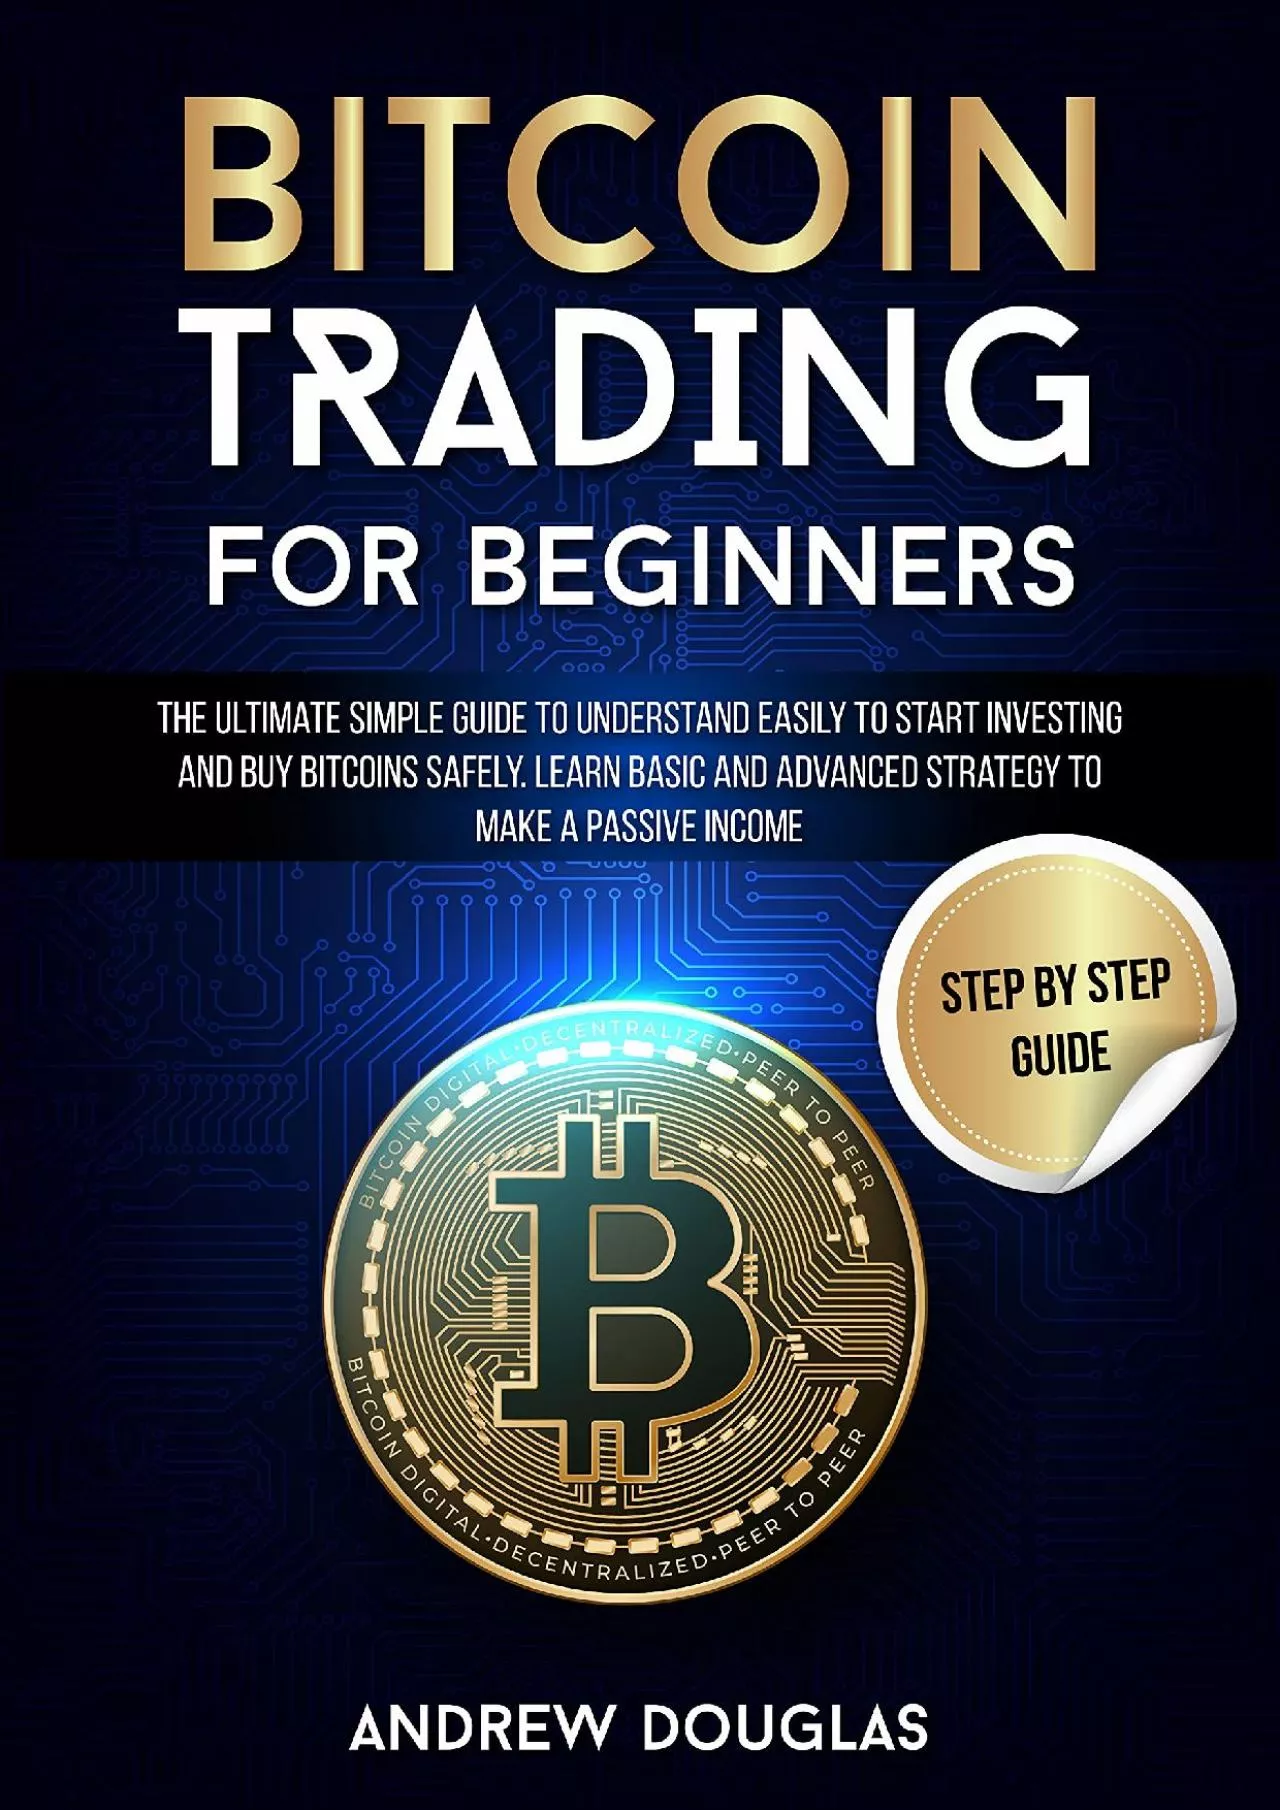 [DOWLOAD]-BITCOIN TRADING FOR BEGINNERS: The Ultimate Simple Guide to Understand Easily